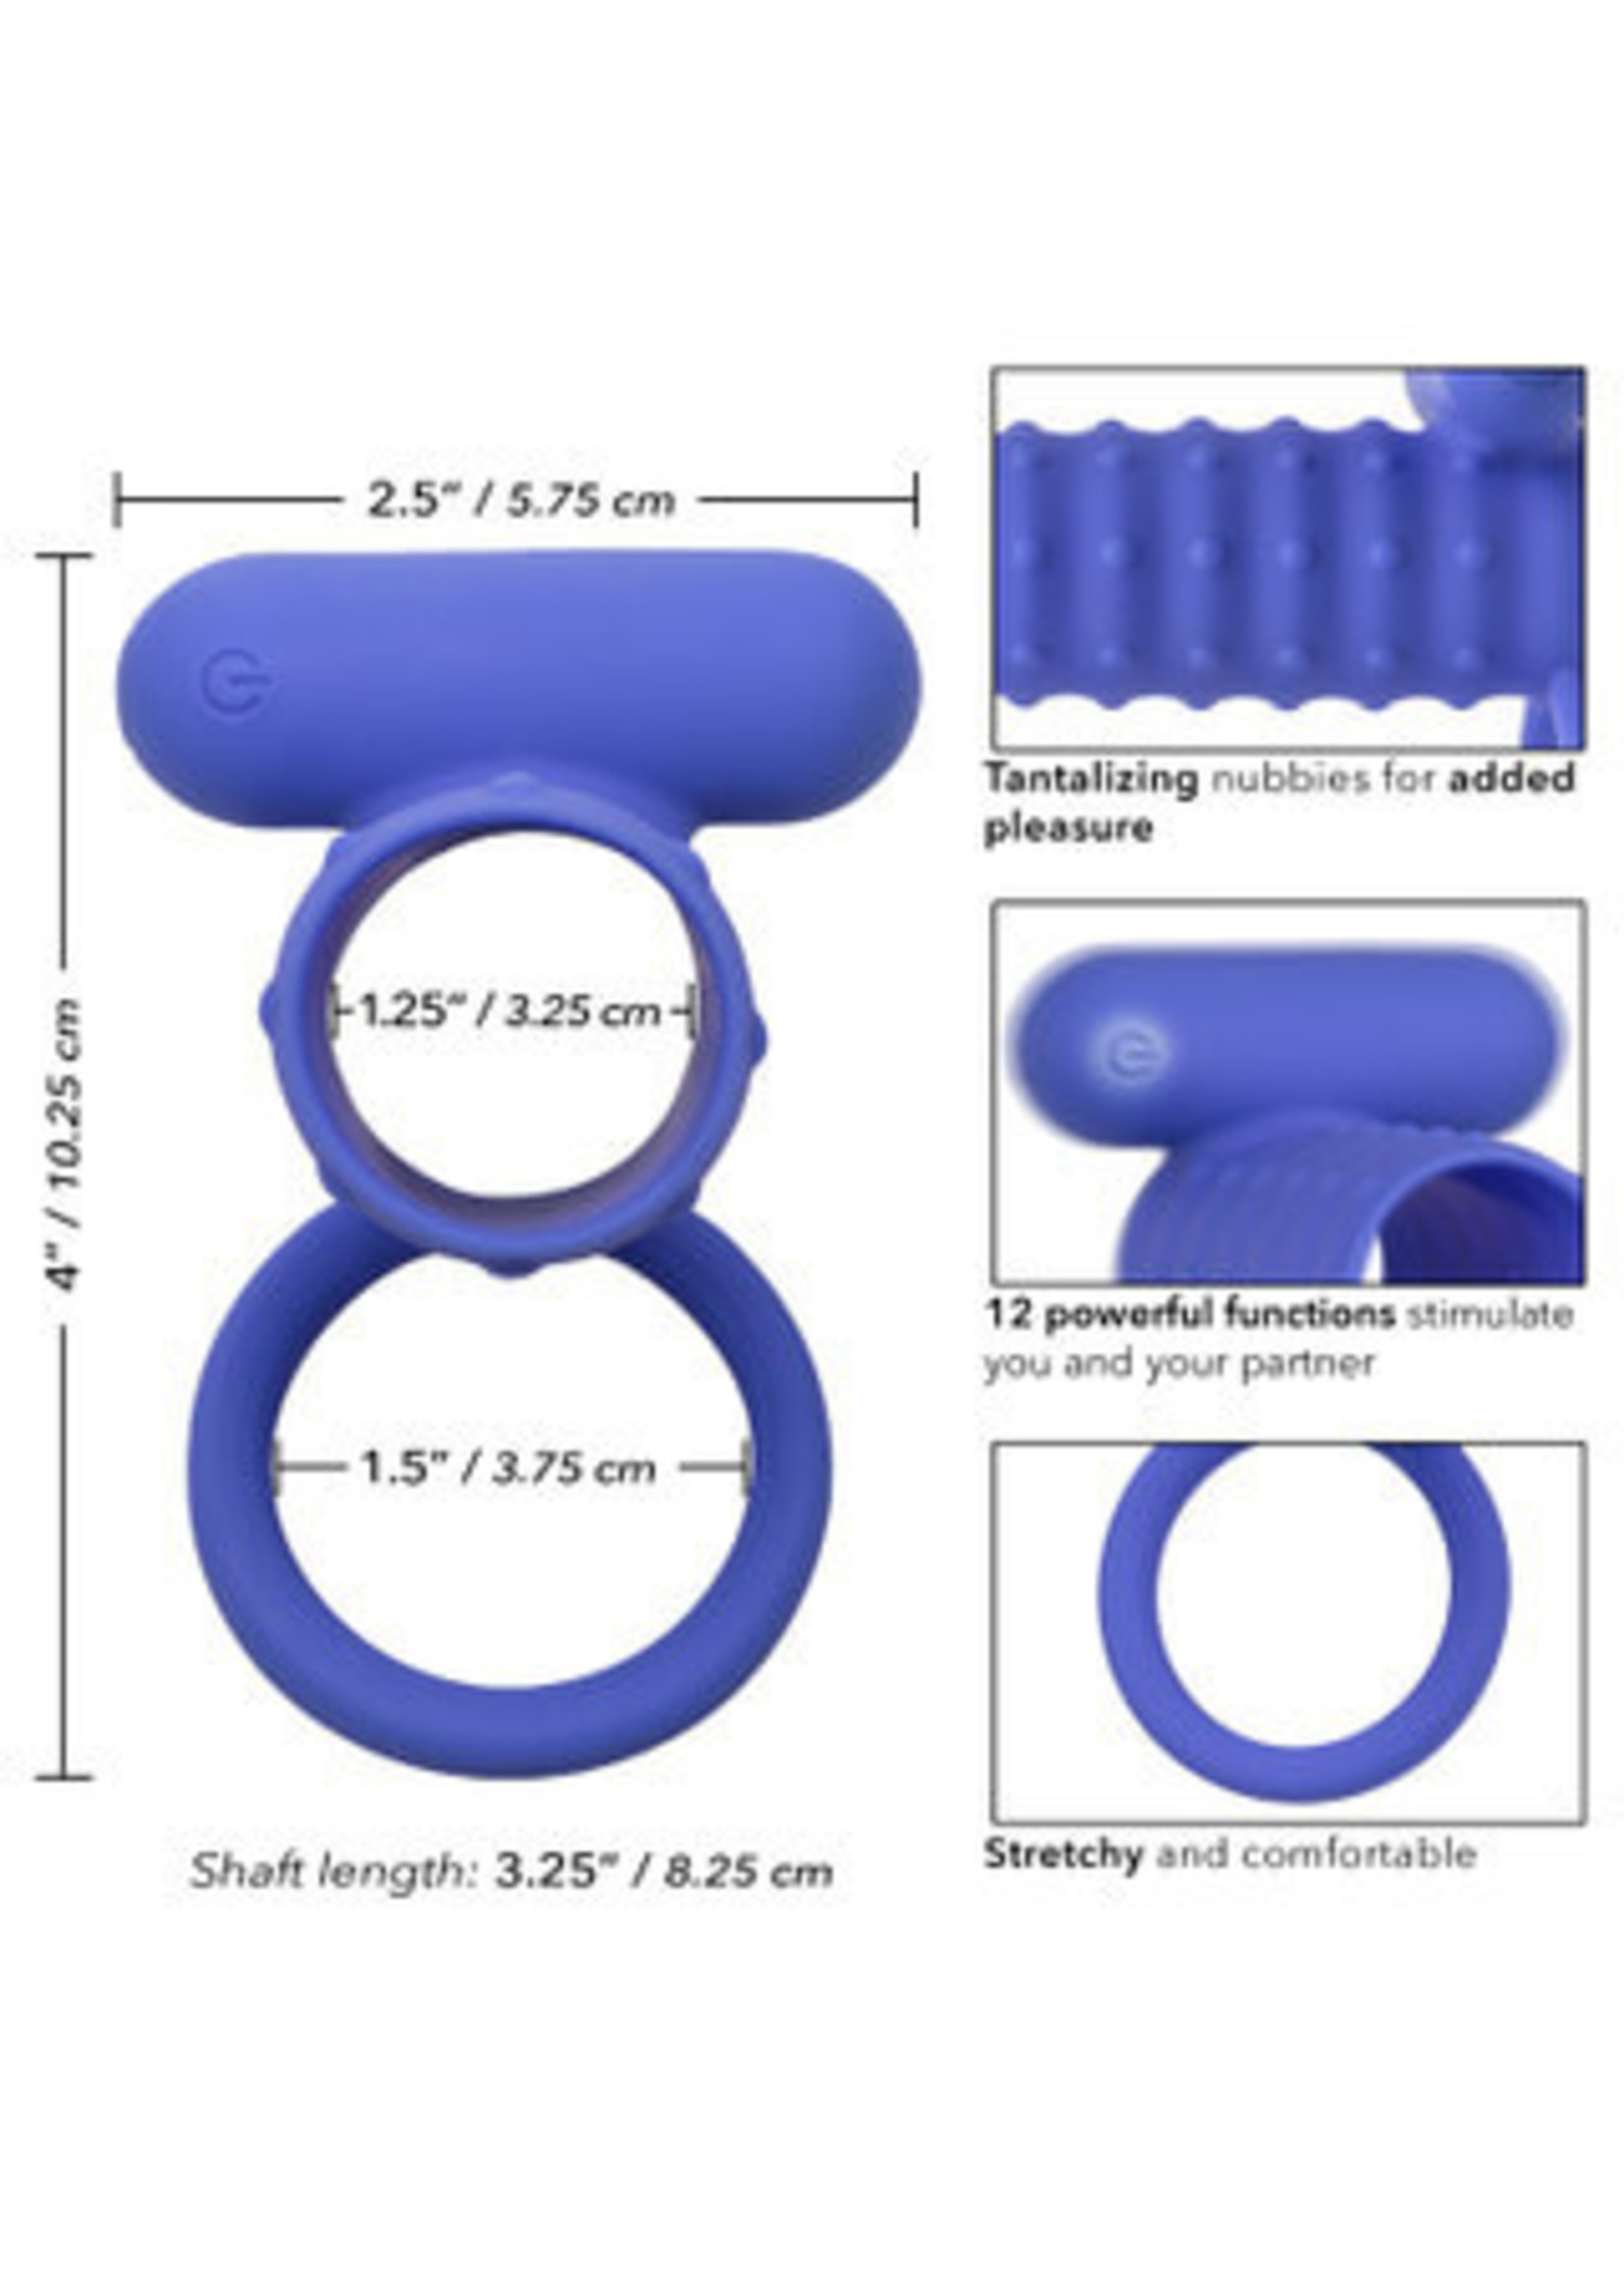 Cal Exotic Novelties Silicone Rechargeable Endless Desires Enhancer